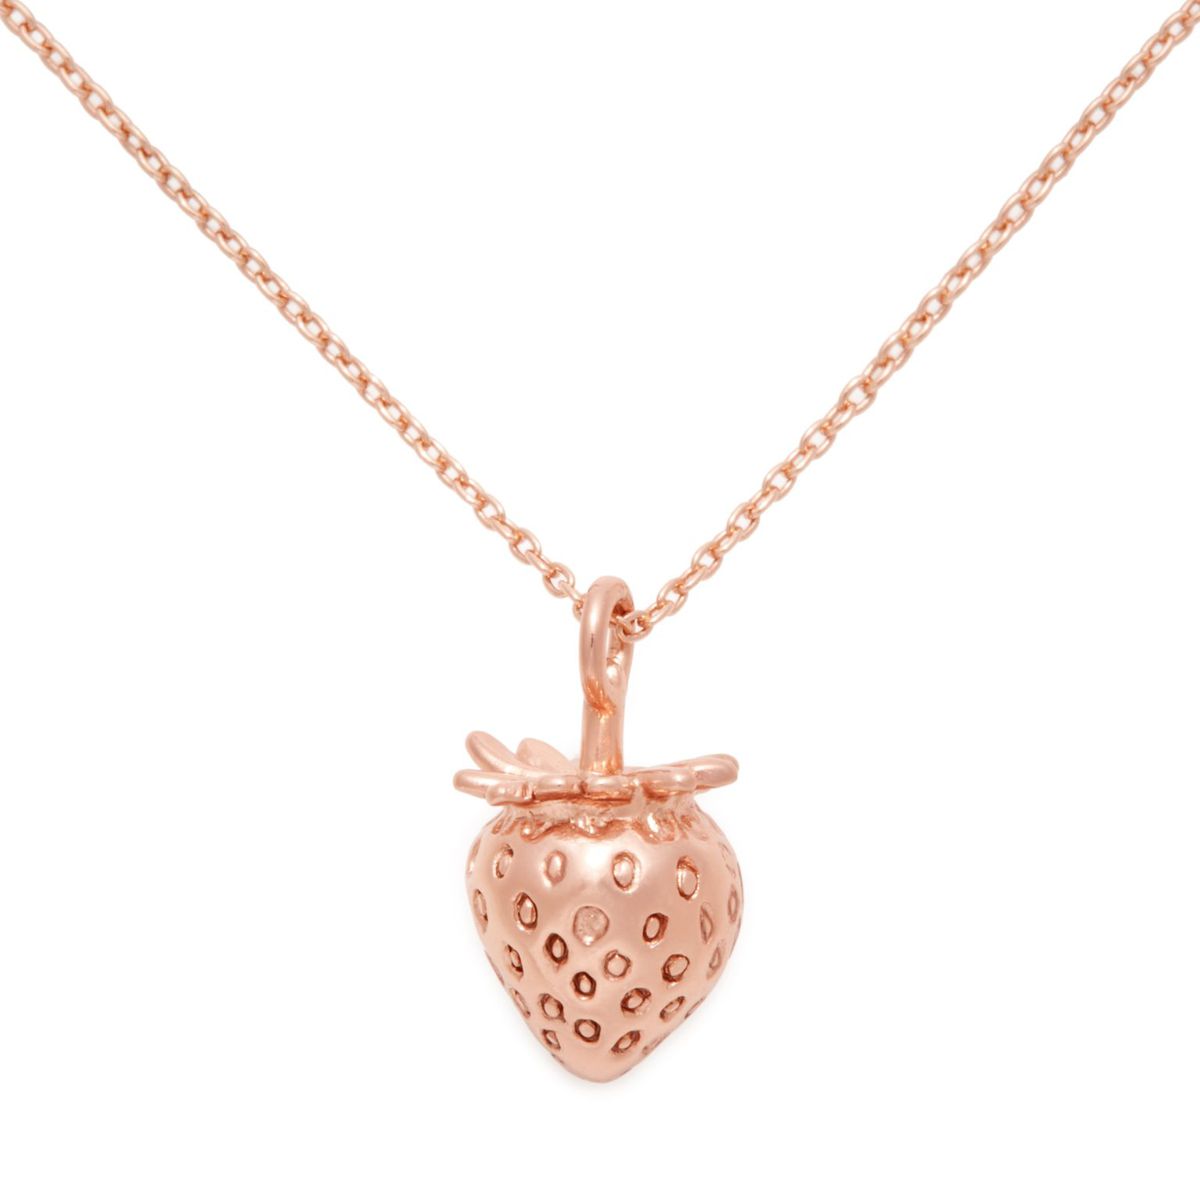 A strawberry charm necklace